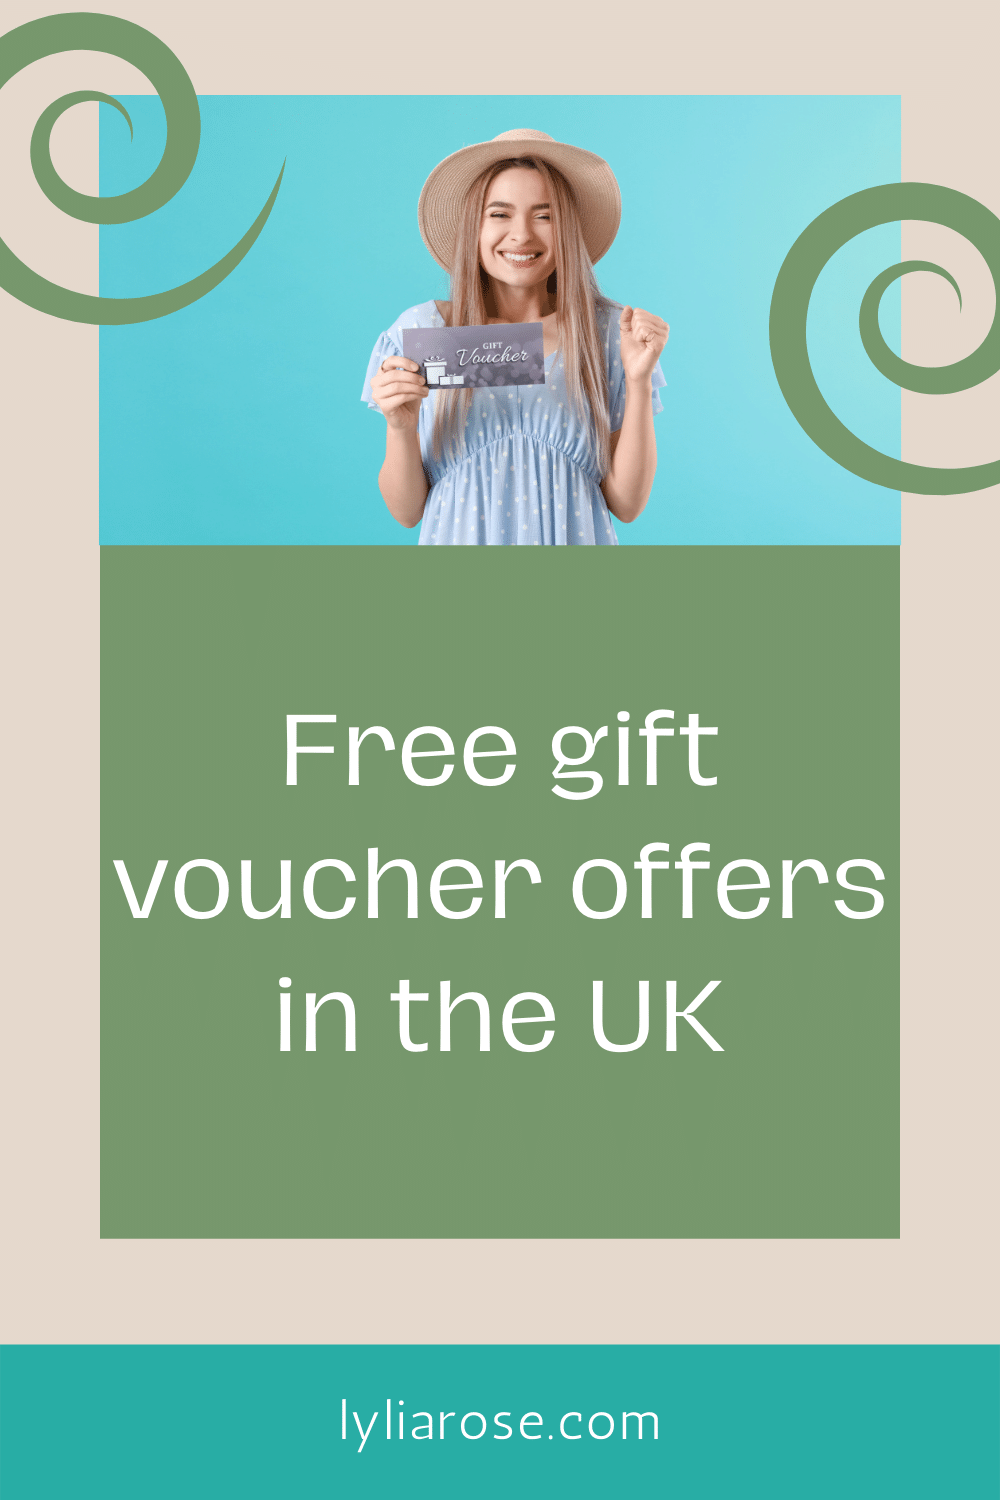 Free gift voucher offers in the UK